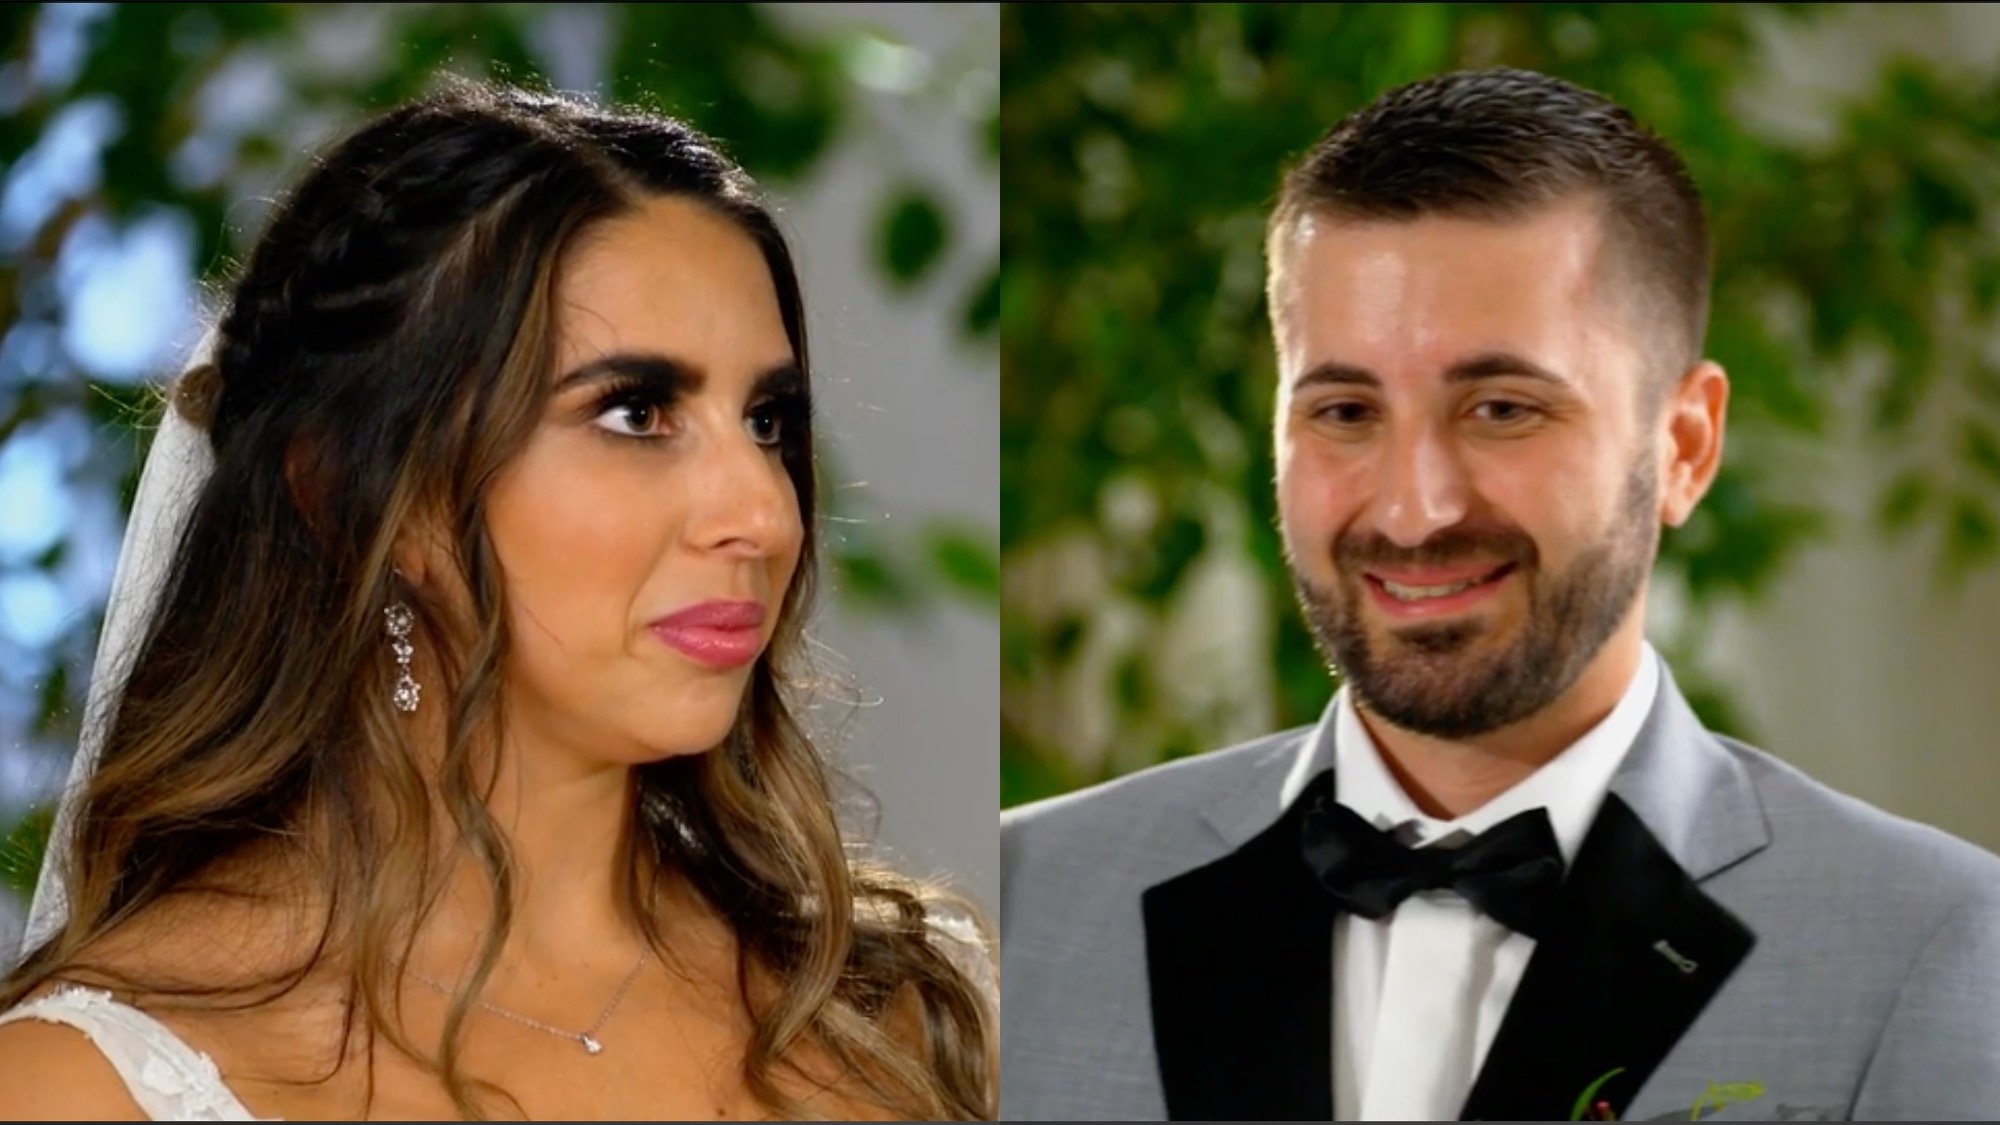 Side-by-side pictures of Nicole and Chris from season 16 of Lifetime's 'Married at First Sight.'